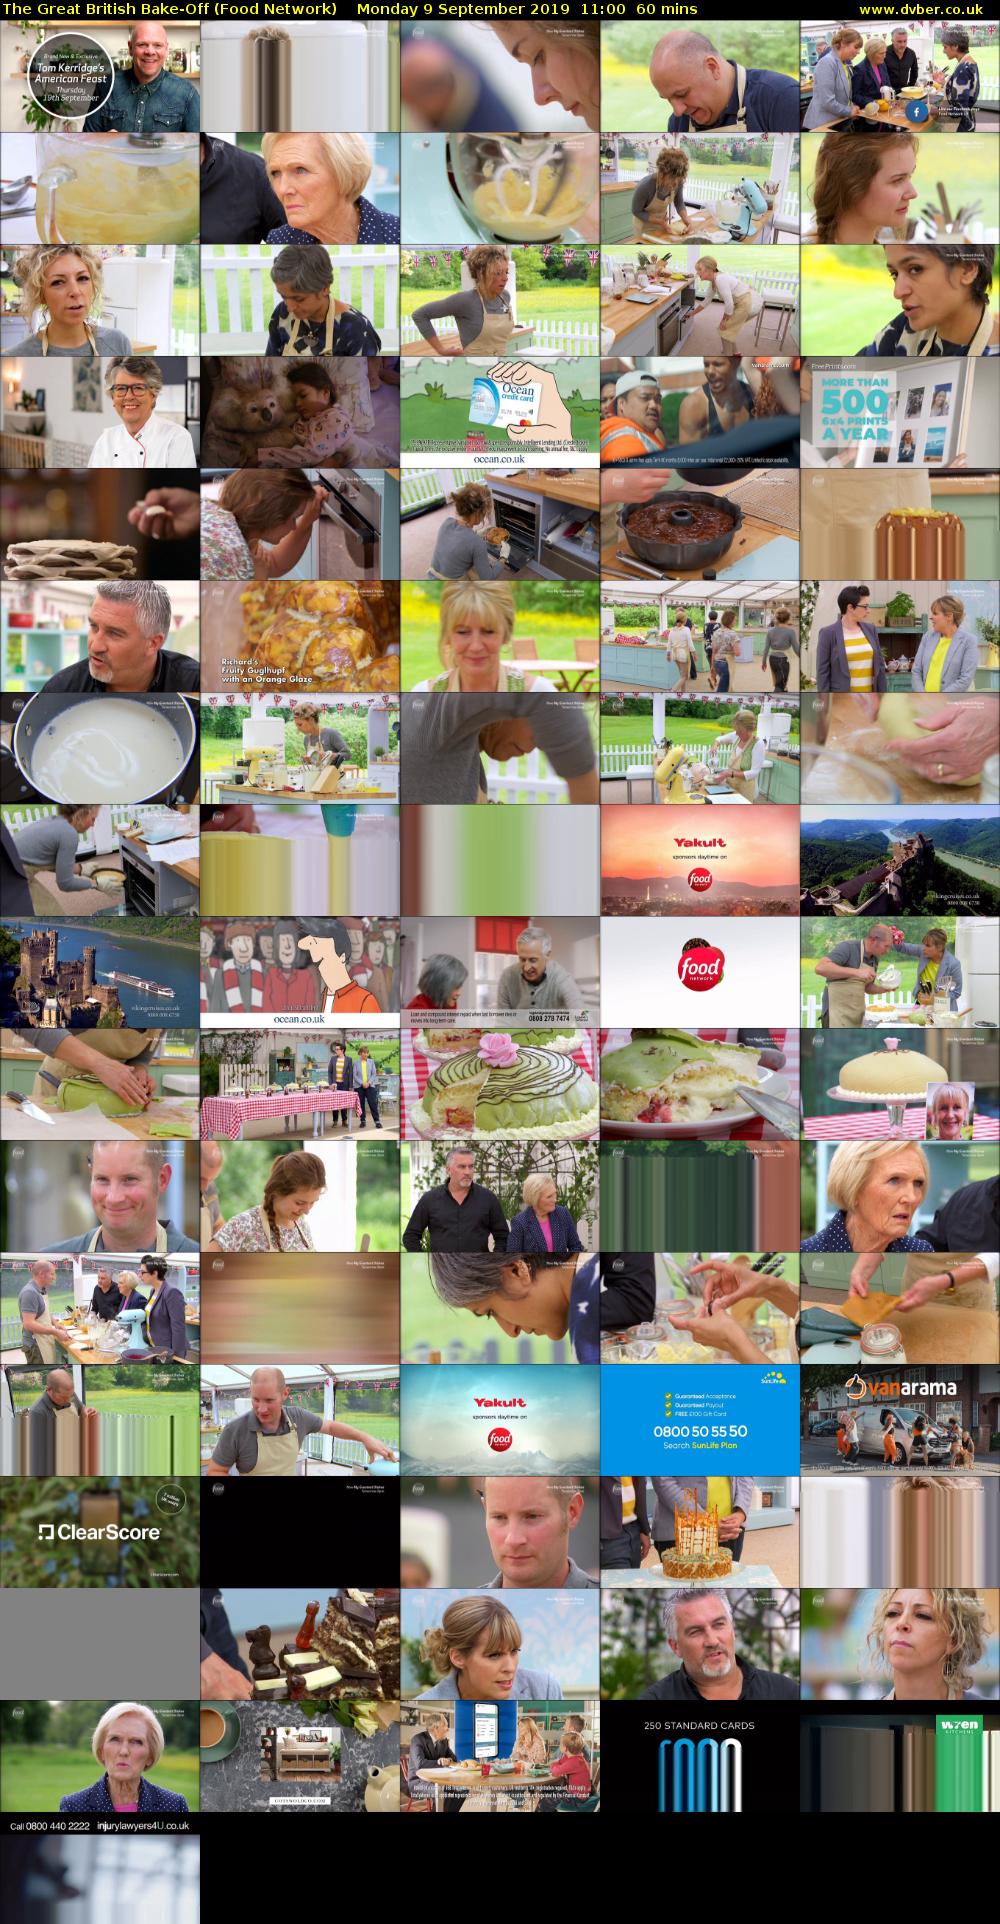 The Great British Bake-Off (Food Network) Monday 9 September 2019 11:00 - 12:00